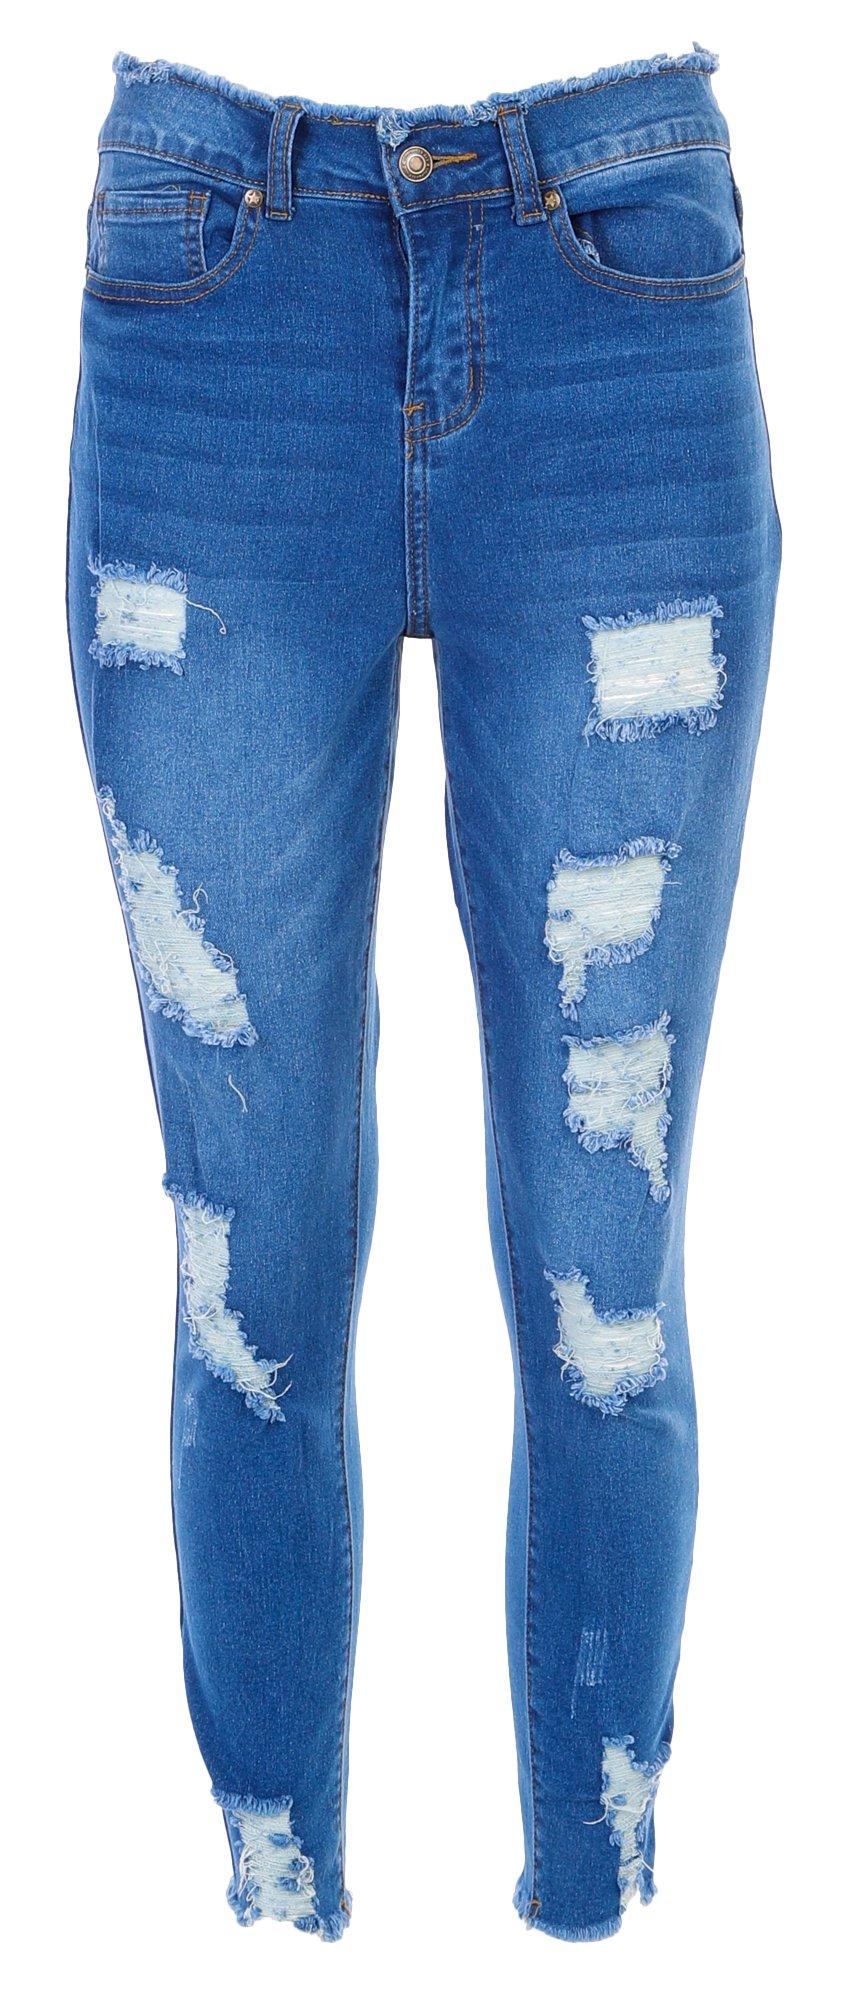 Hobo Chic  Extreme ripped jeans, Girls ripped jeans, Destroyed denim jeans